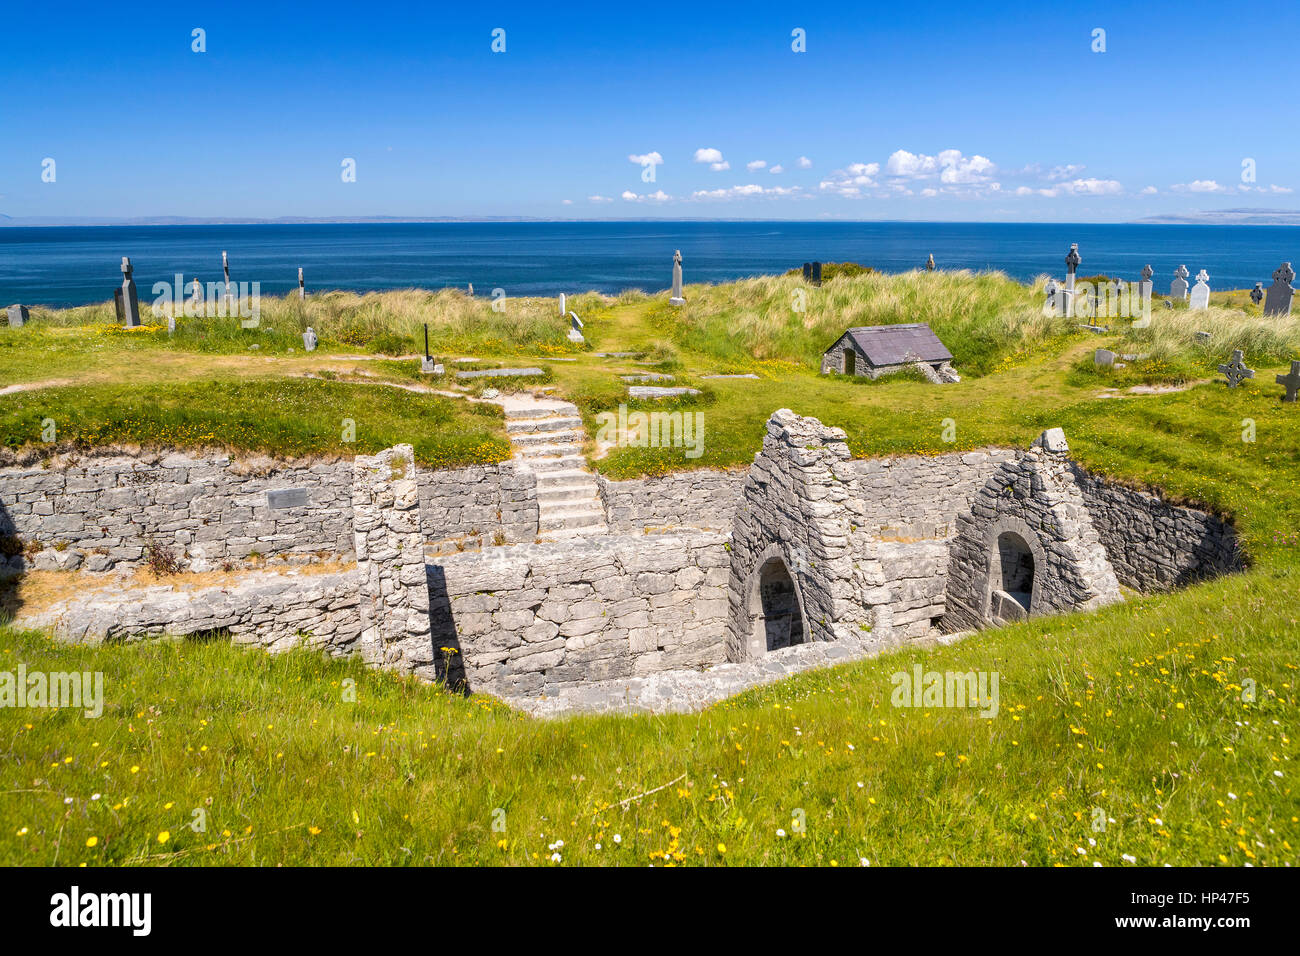 Saint Caomhan's church with Caomhan's grave at Inis Oirr, County Galway, Ireland, Europe. Stock Photo